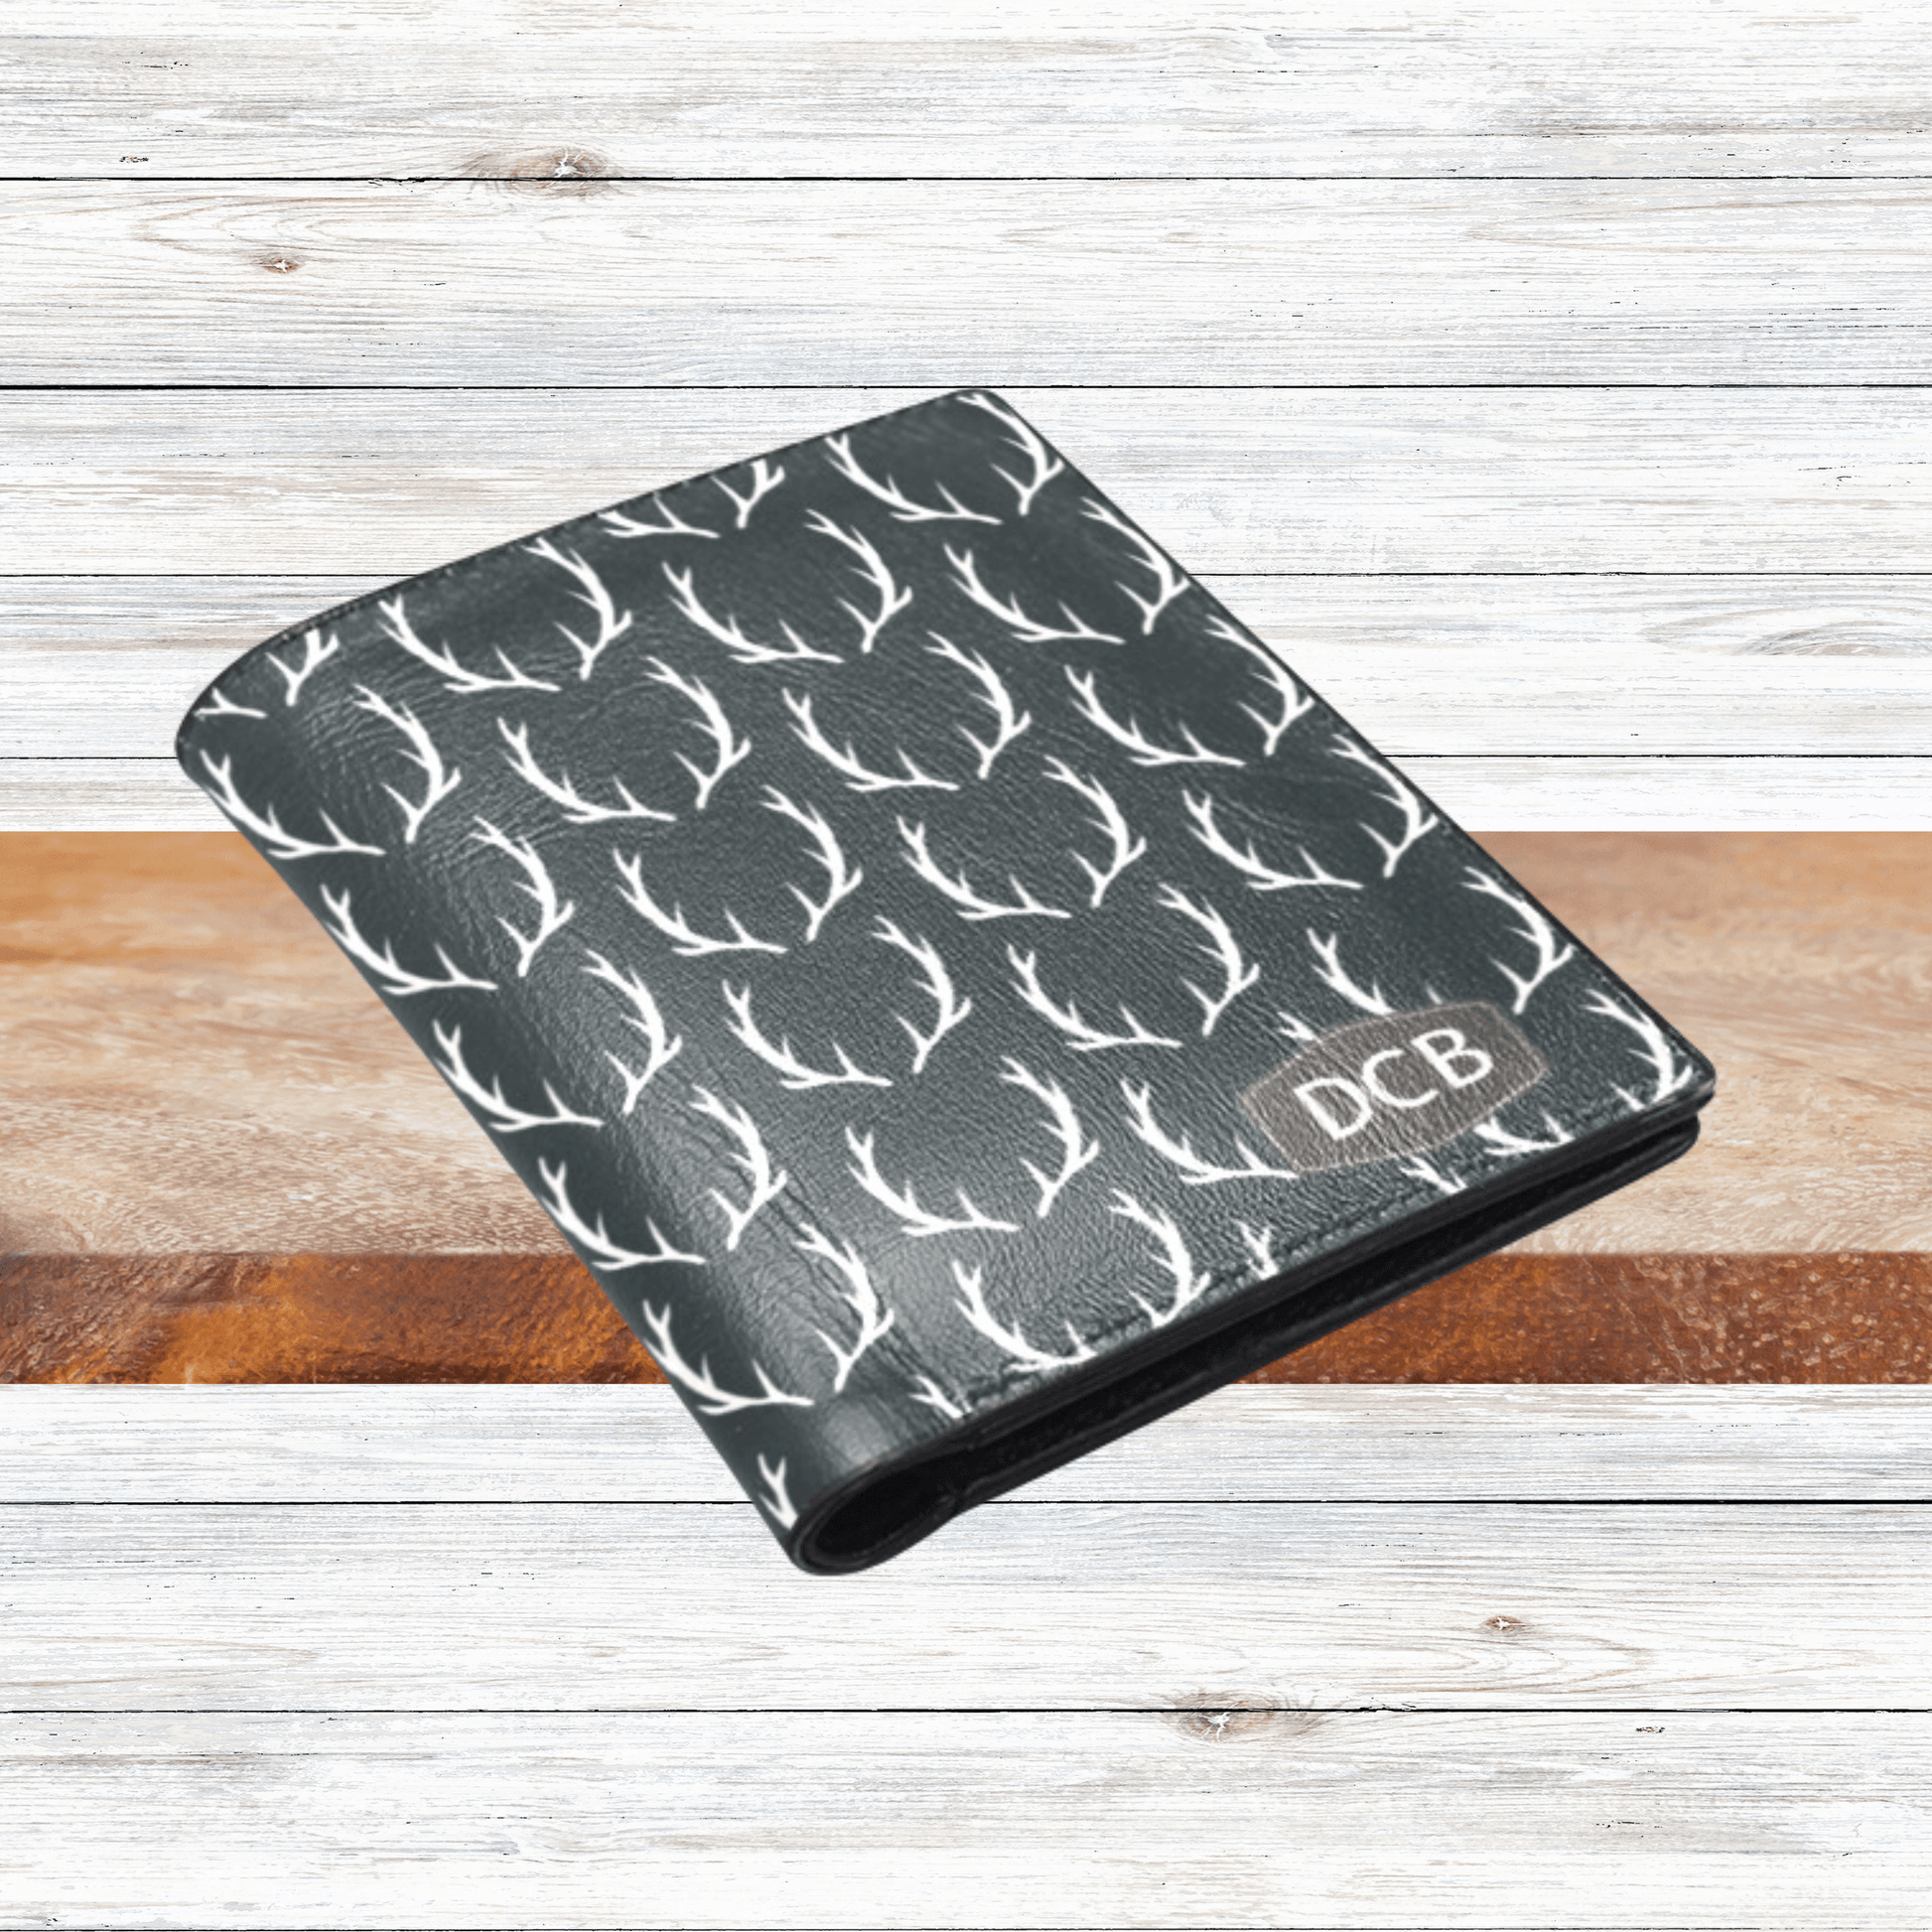 Our mens custom wallet is black with deer antlers and monogrammed initials in the corner and makes the perfect gift for the man that has everything.